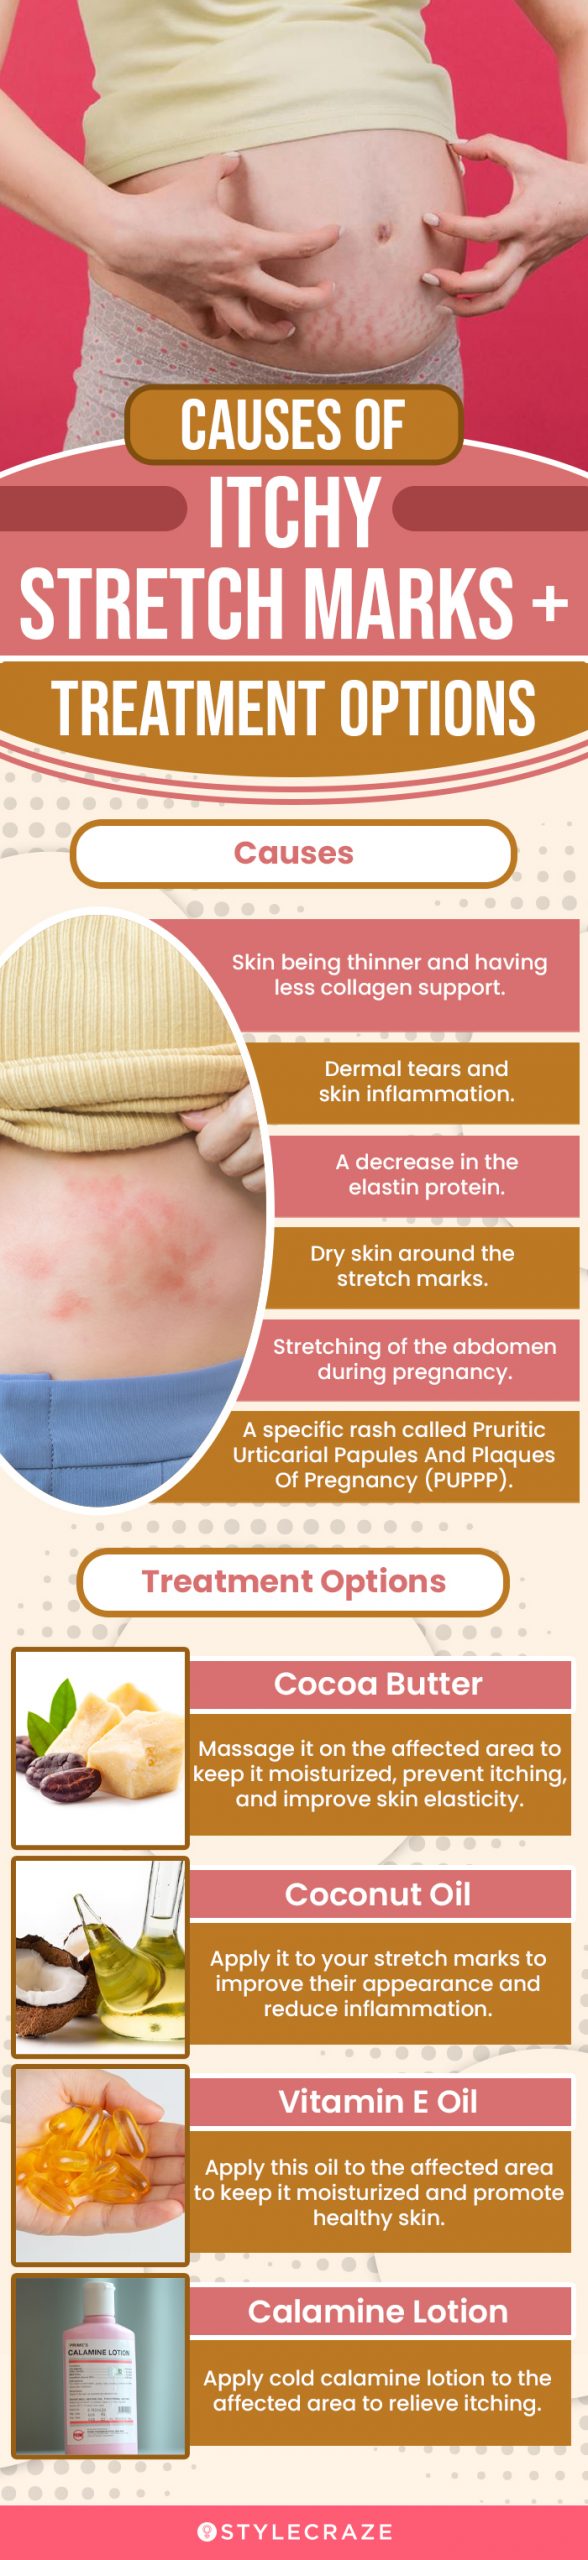 causes of itchy stretch marks and treatment options (infographic)